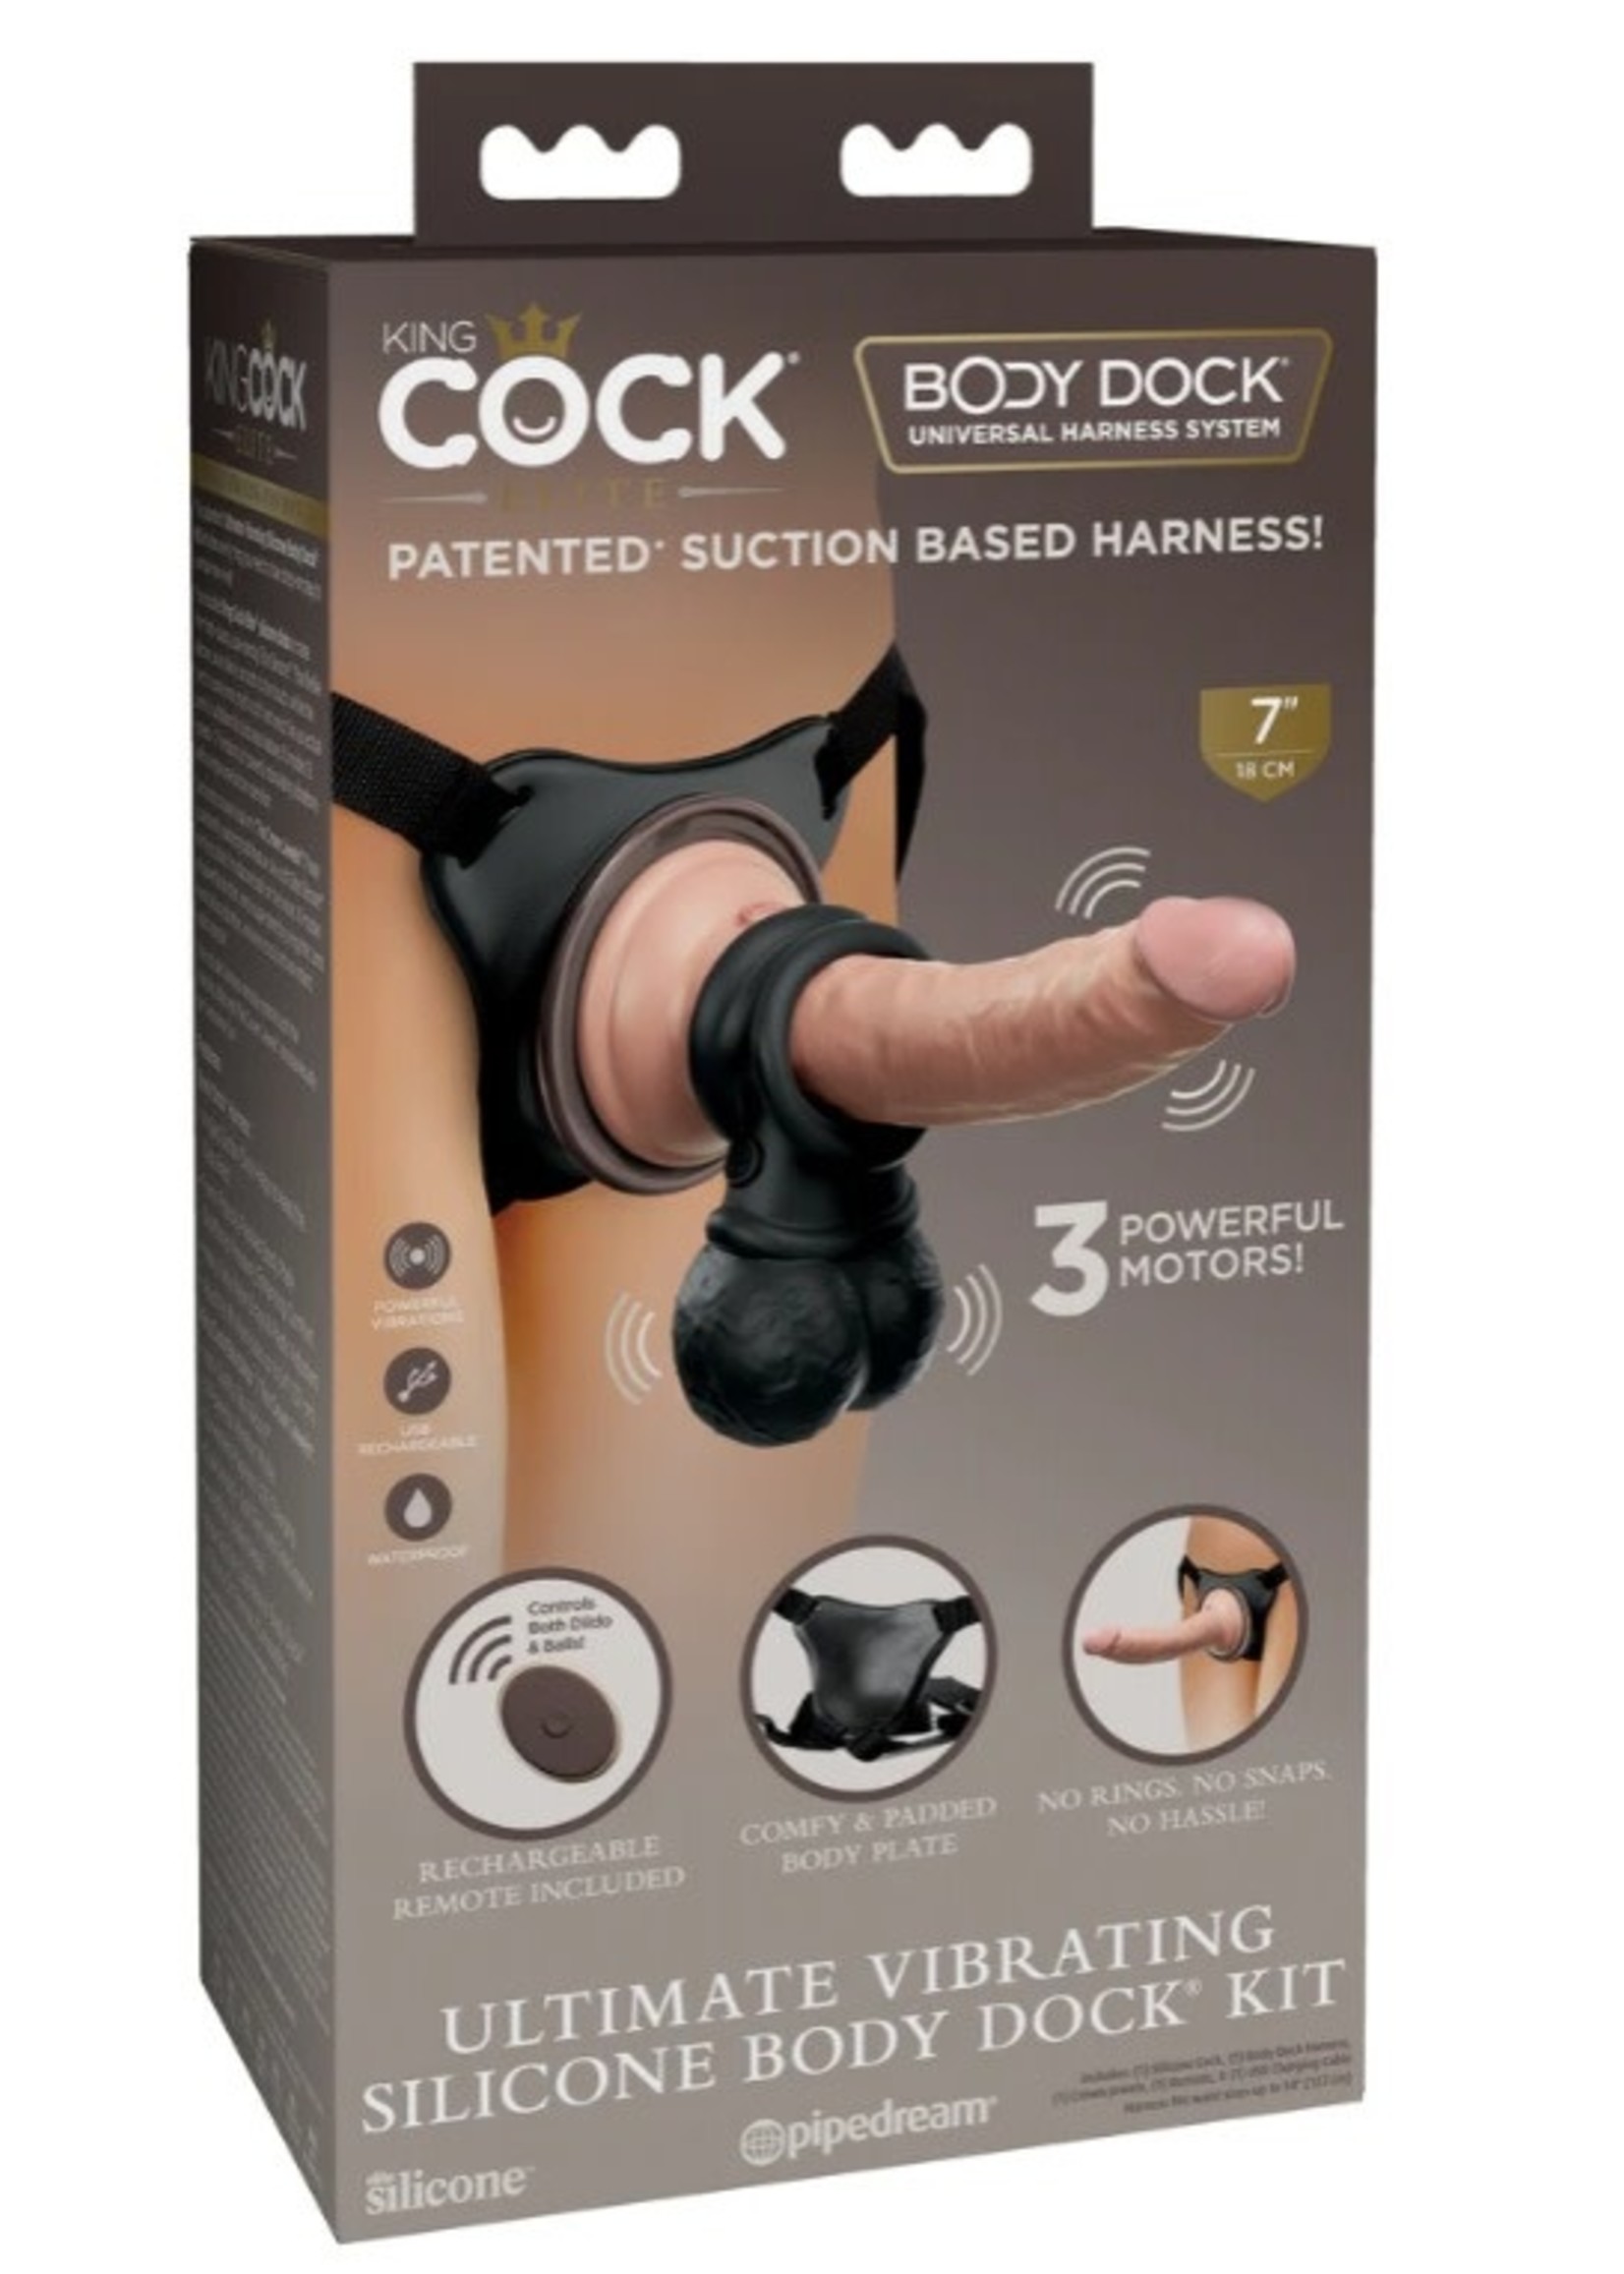 King Cock Elite Ultimate Vibrating Rechargeable Silicone Body Dock Kit with Vibrating Crown Jewels and Remote Control Dildo 7in - Vanilla/Black